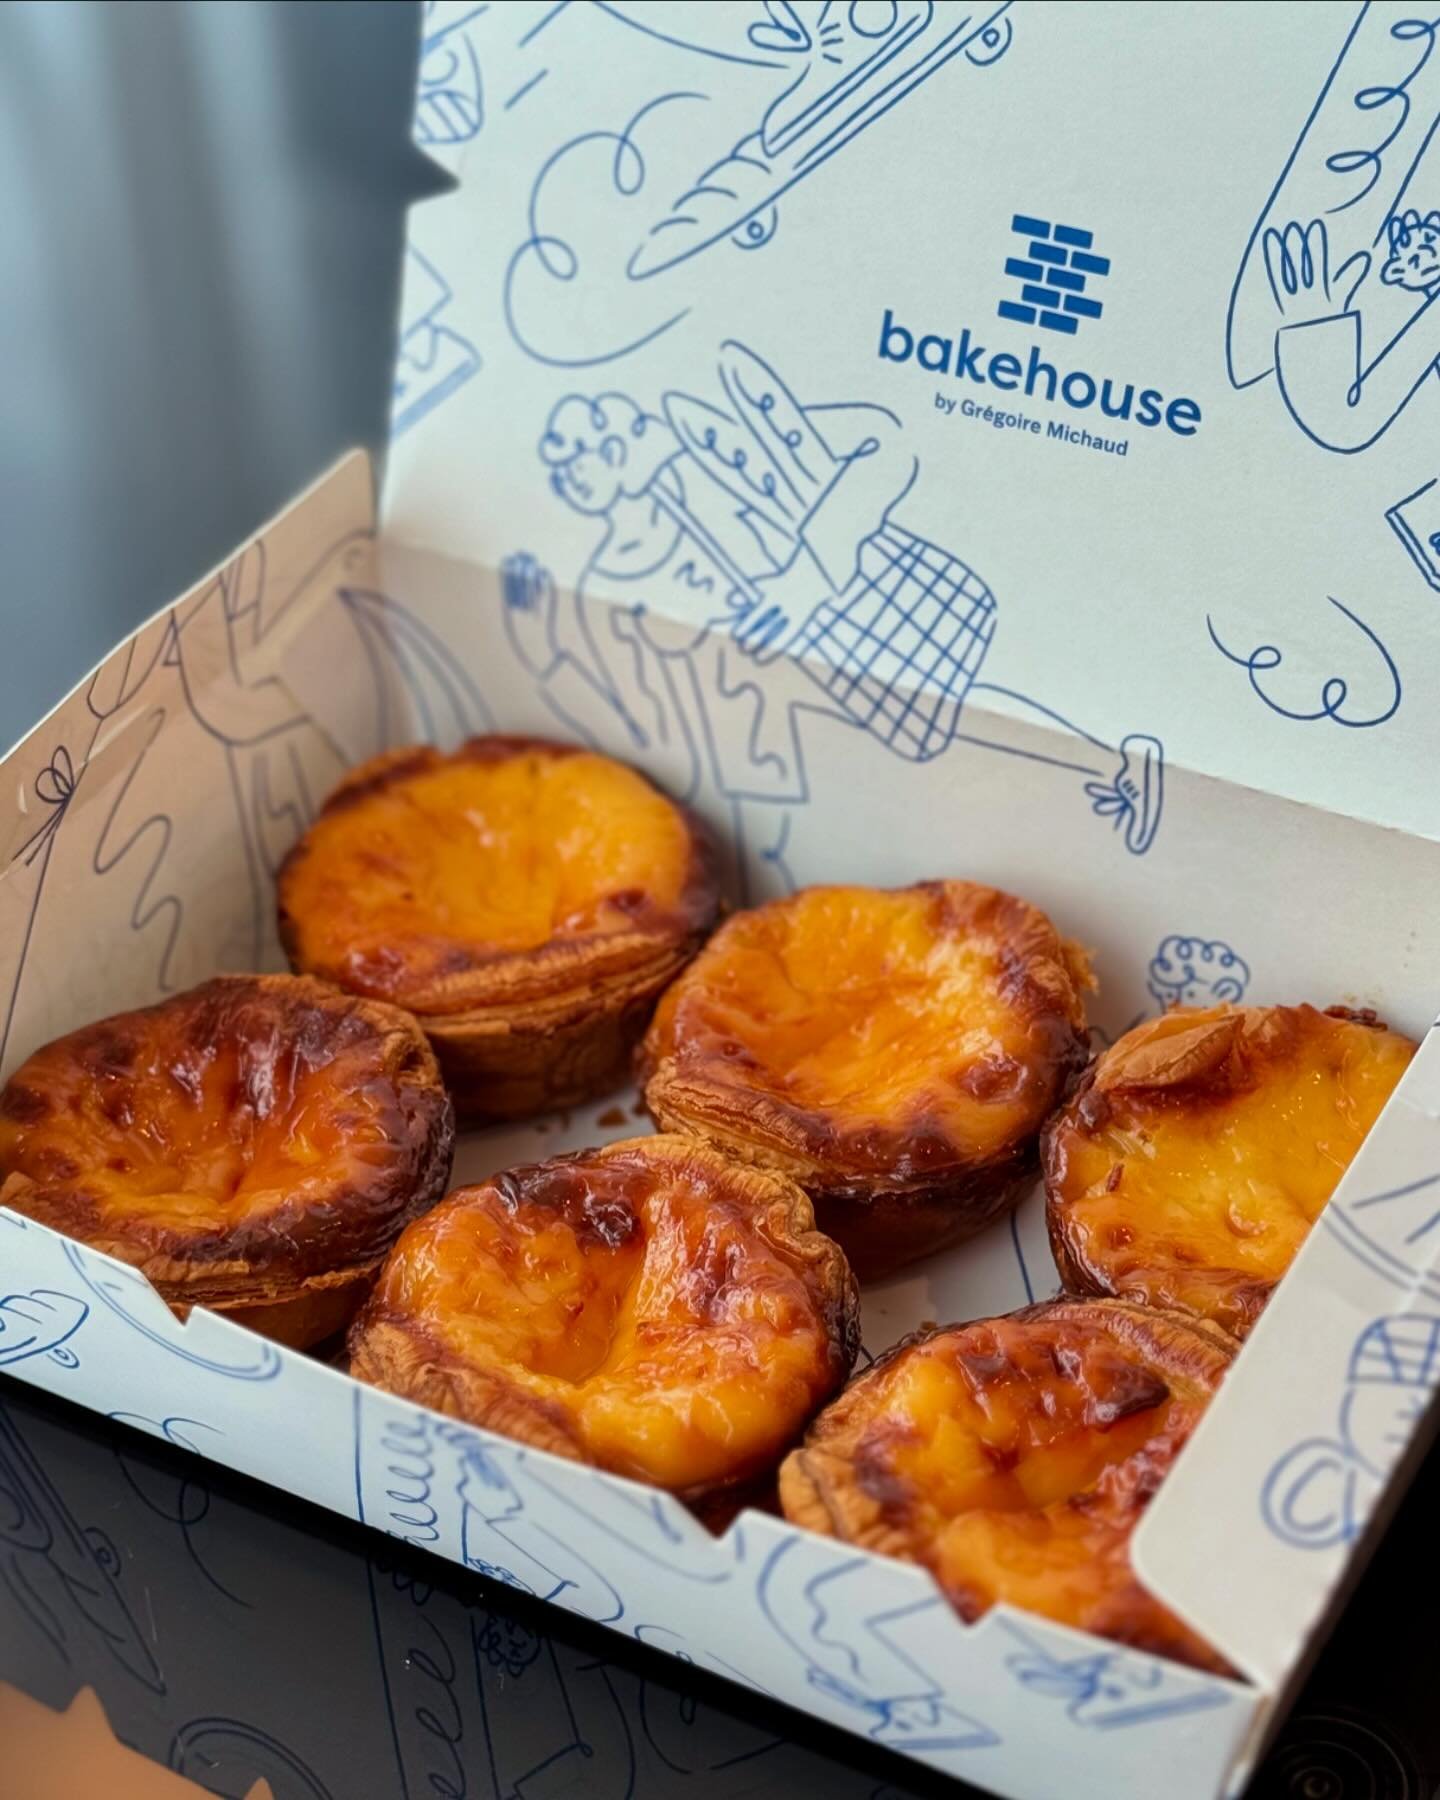 Flaky, laminated sourdough crust. What a wonderful upgrade to the iconic #HongKong-style egg tart.

Just be prepared to either head down damn early for the morning batch (it was sold out by 9.45AM on a Monday), or pre-order and come back to pick up y